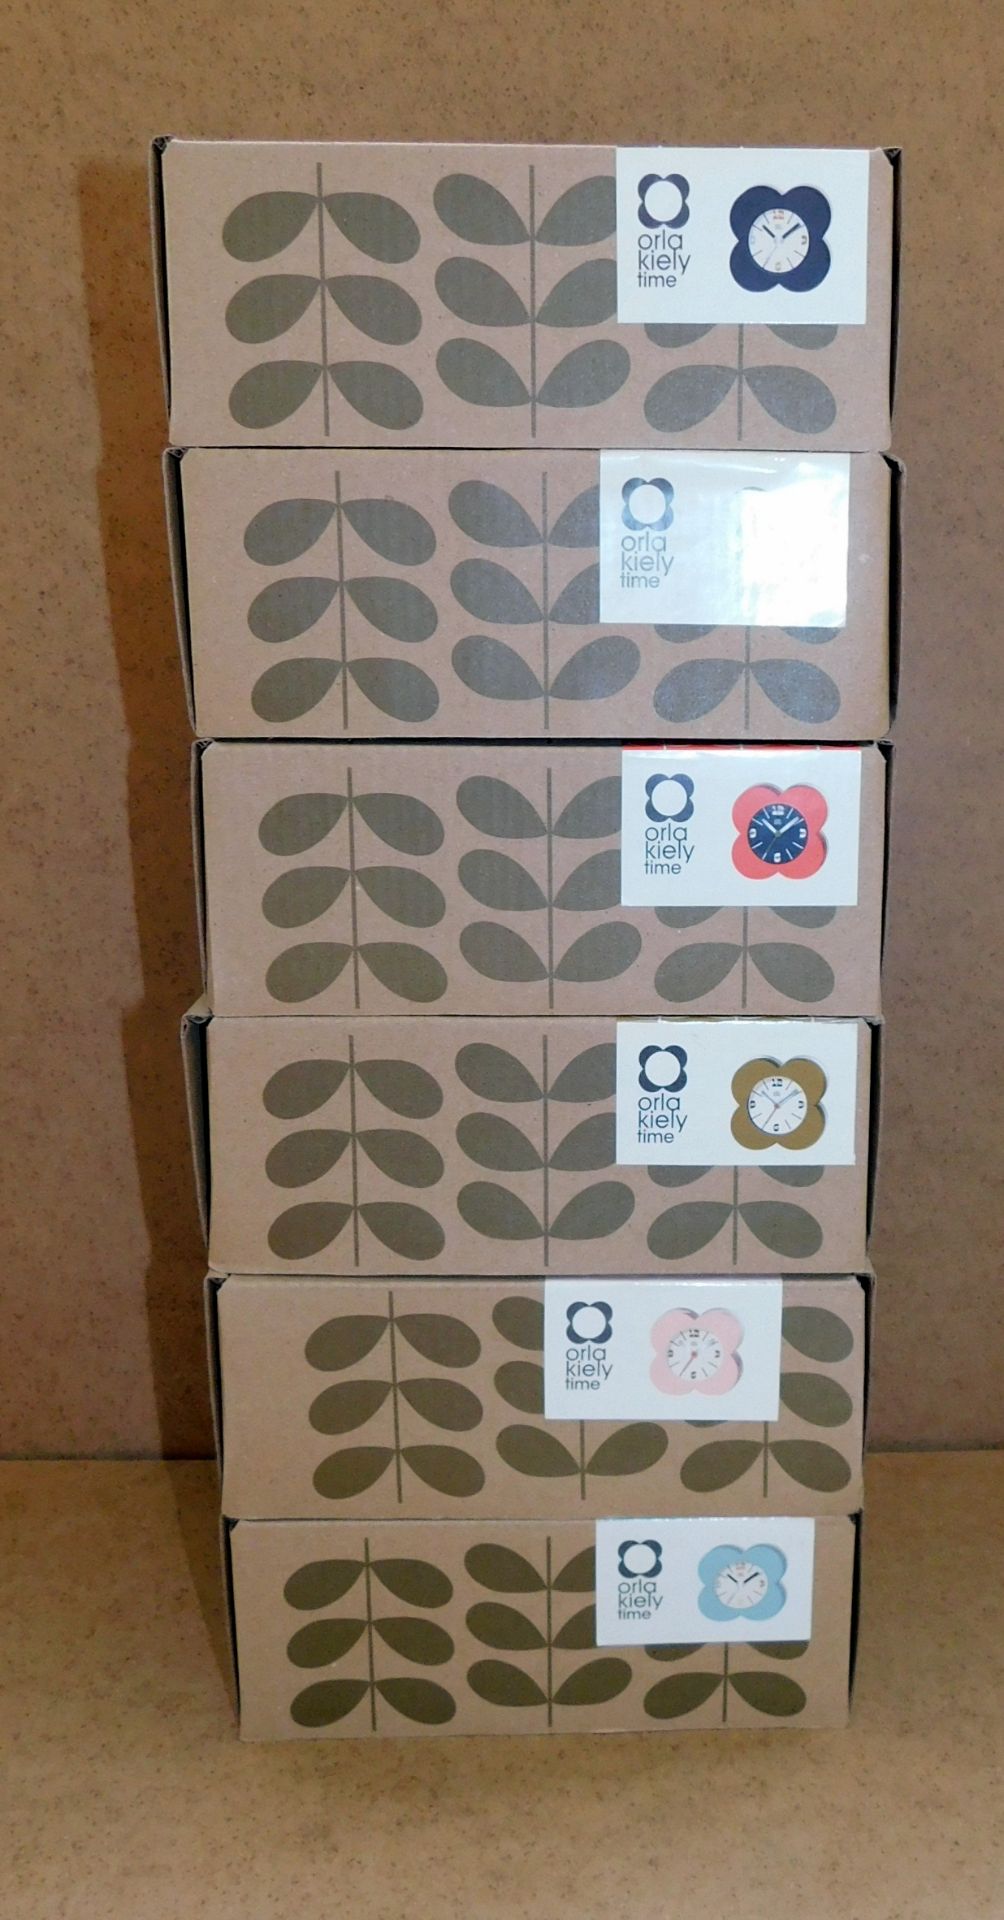 6 Orla Kiely Clocks, Grey/Pink/Olive/Red/White/Blue (RRP £39.95 each) - Image 2 of 2